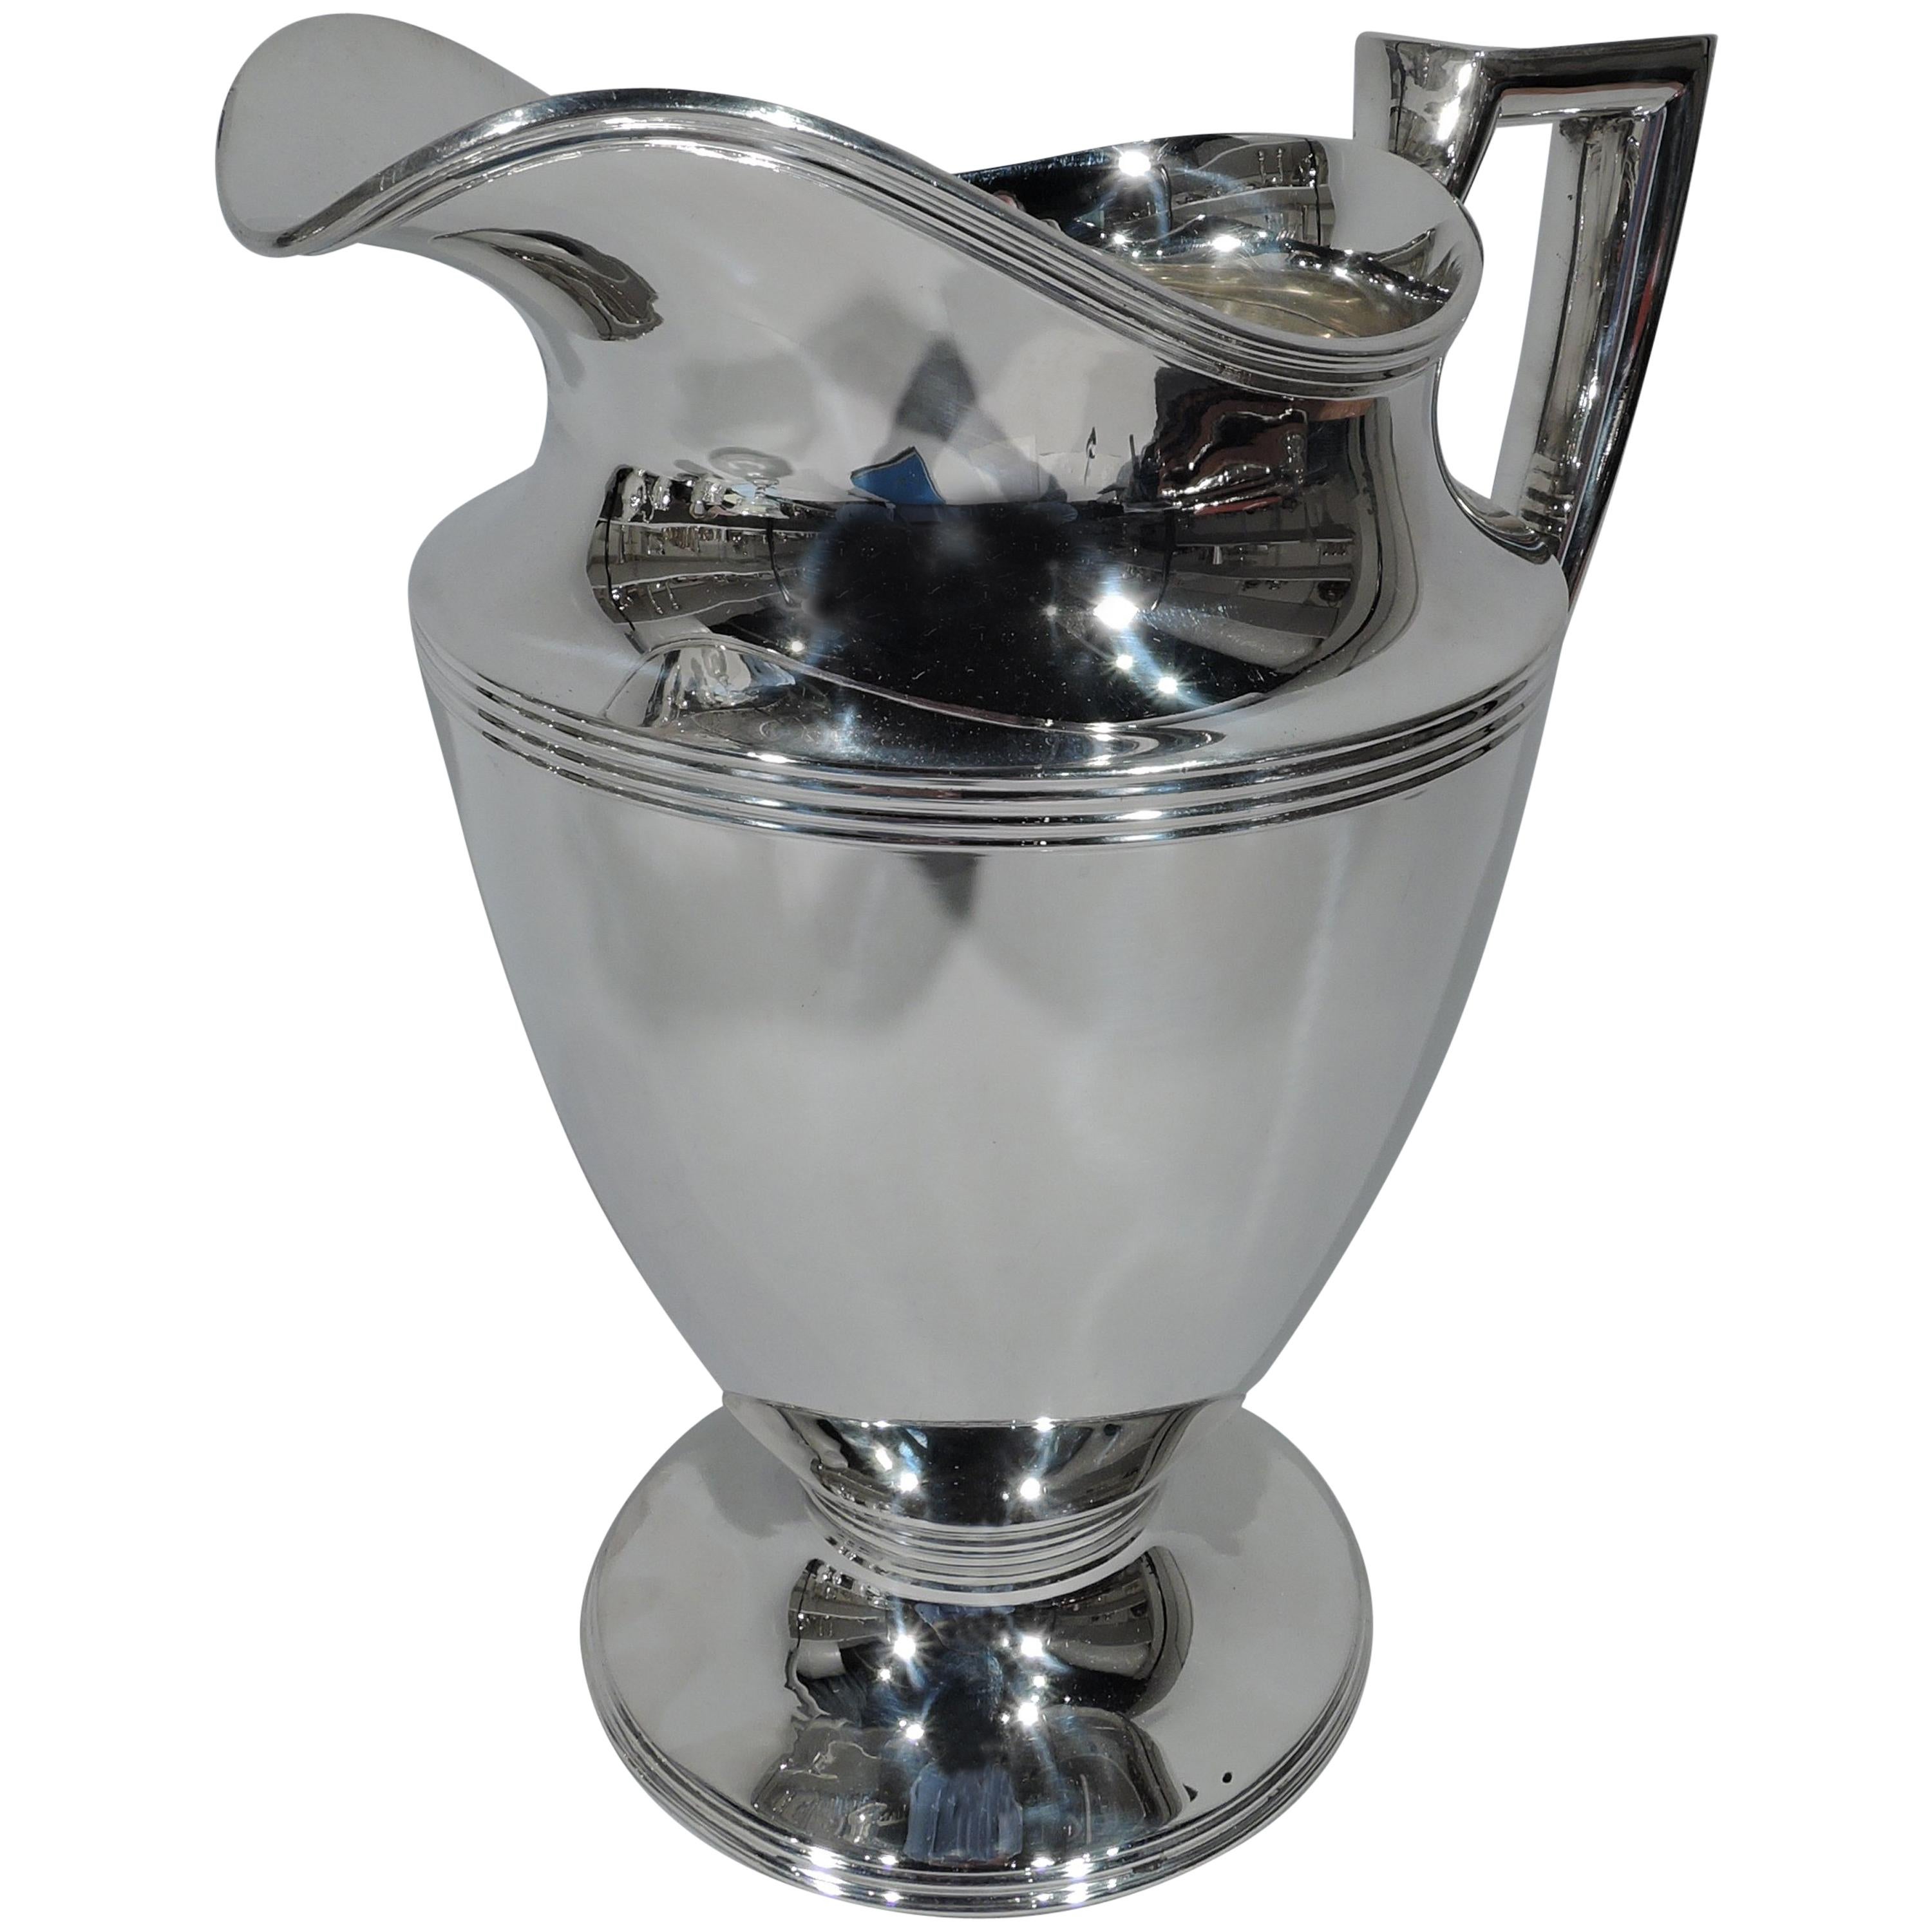 Tiffany Classic Sterling Silver Water Pitcher